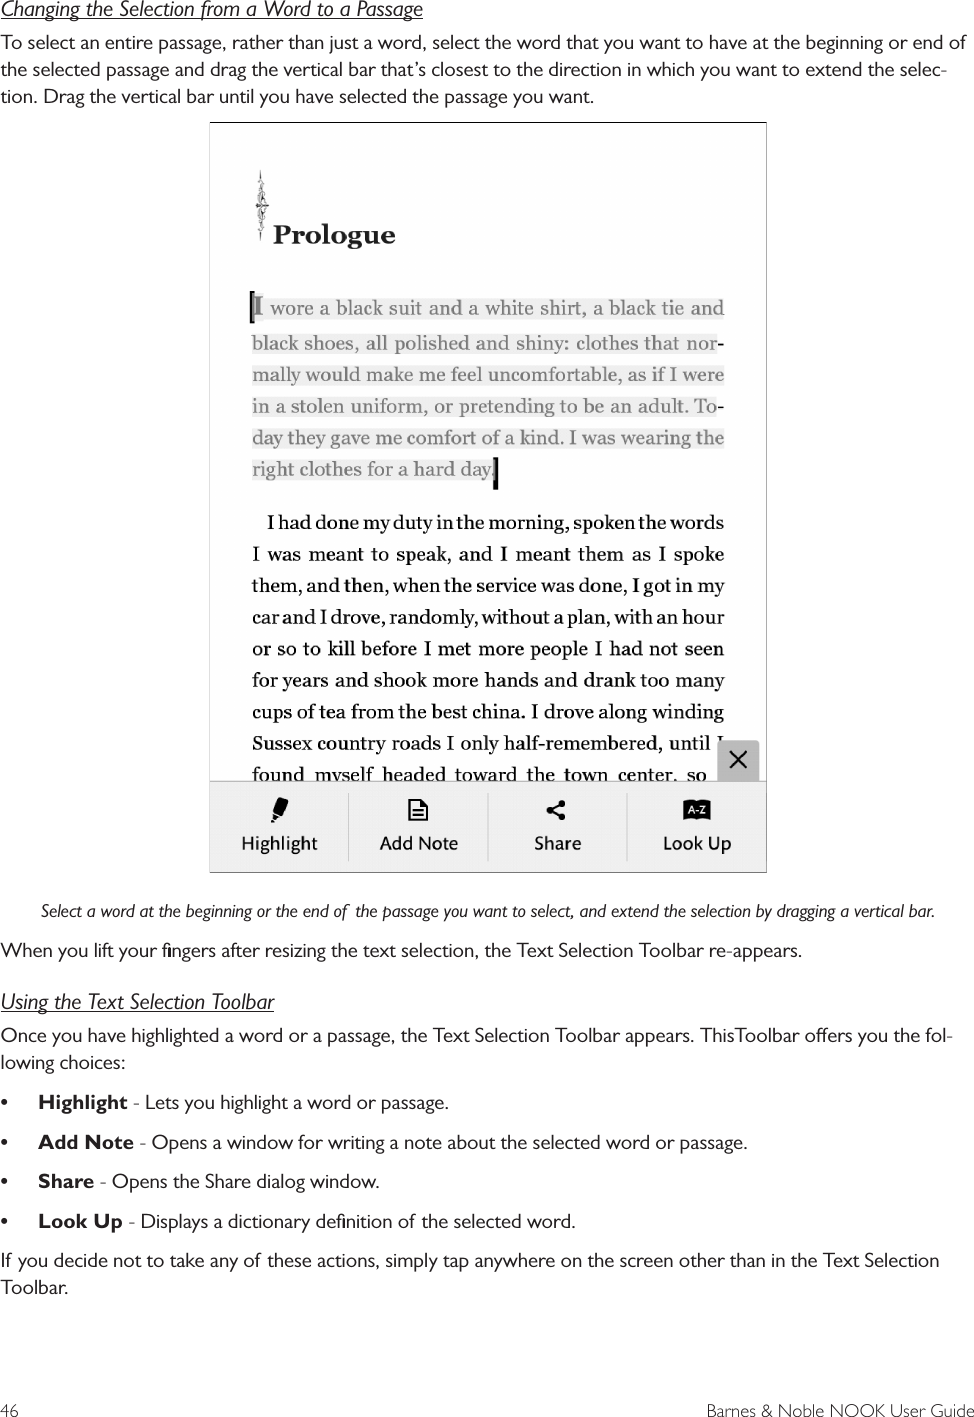 46  Barnes &amp; Noble NOOK User GuideChanging the Selection from a Word to a PassageTo select an entire passage, rather than just a word, select the word that you want to have at the beginning or end of the selected passage and drag the vertical bar that’s closest to the direction in which you want to extend the selec-tion. Drag the vertical bar until you have selected the passage you want.Select a word at the beginning or the end of  the passage you want to select, and extend the selection by dragging a vertical bar.When you lift your ﬁngers after resizing the text selection, the Text Selection Toolbar re-appears.Using the Text Selection ToolbarOnce you have highlighted a word or a passage, the Text Selection Toolbar appears. ThisToolbar oers you the fol-lowing choices: • Highlight - Lets you highlight a word or passage.• Add Note - Opens a window for writing a note about the selected word or passage.• Share - Opens the Share dialog window.• Look Up - Displays a dictionary deﬁnition of the selected word.If you decide not to take any of these actions, simply tap anywhere on the screen other than in the Text Selection Toolbar.